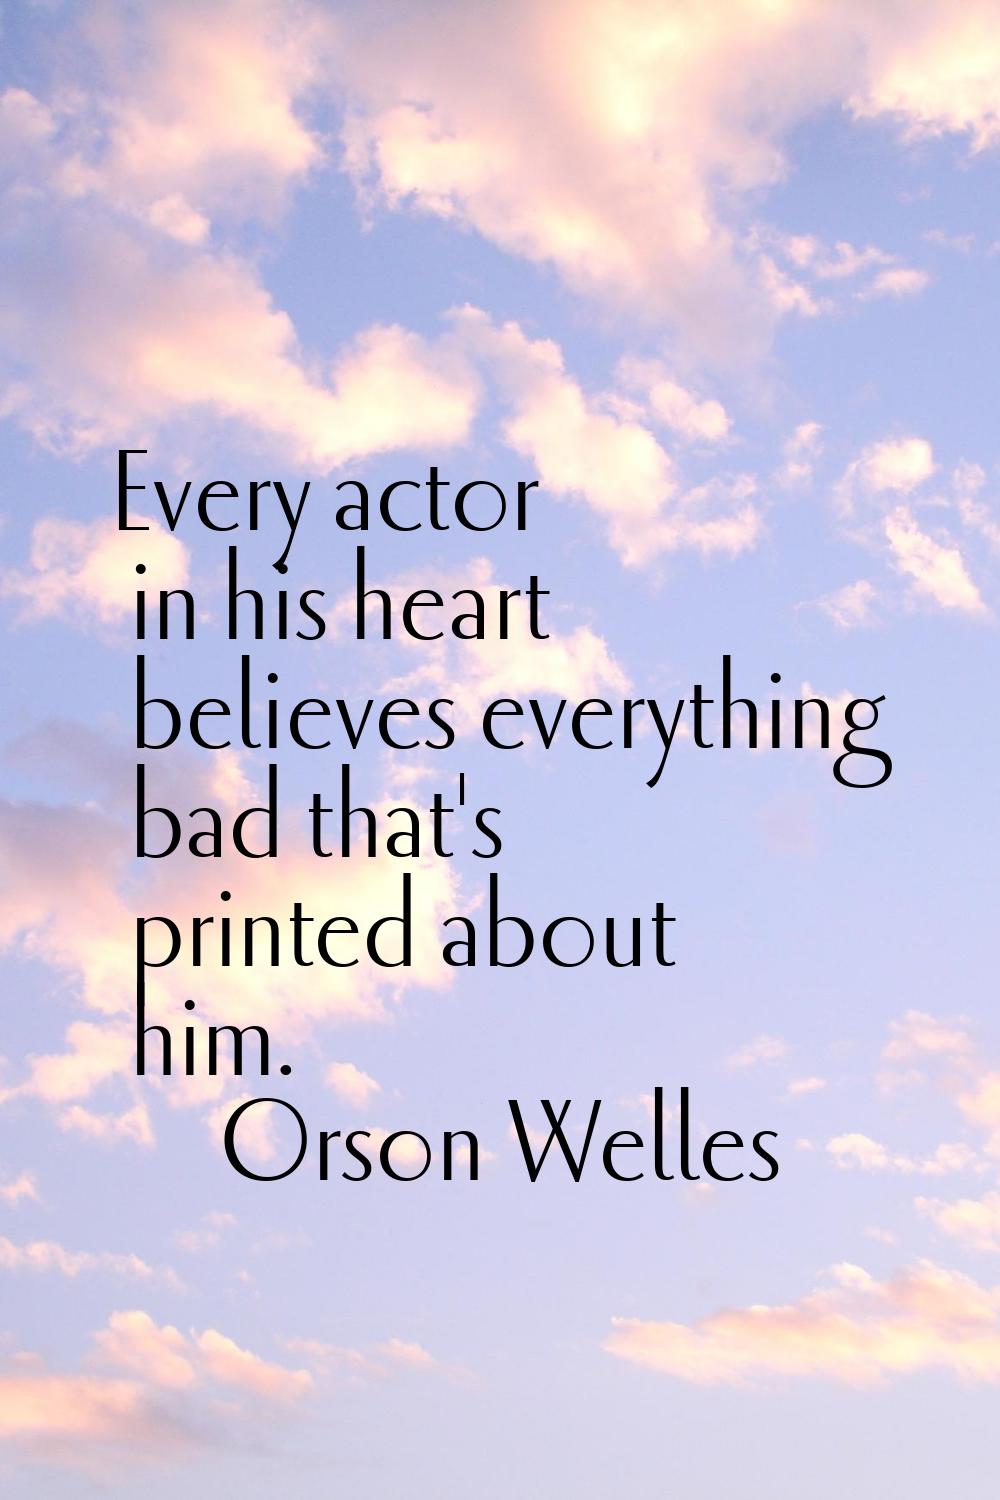 Every actor in his heart believes everything bad that's printed about him.